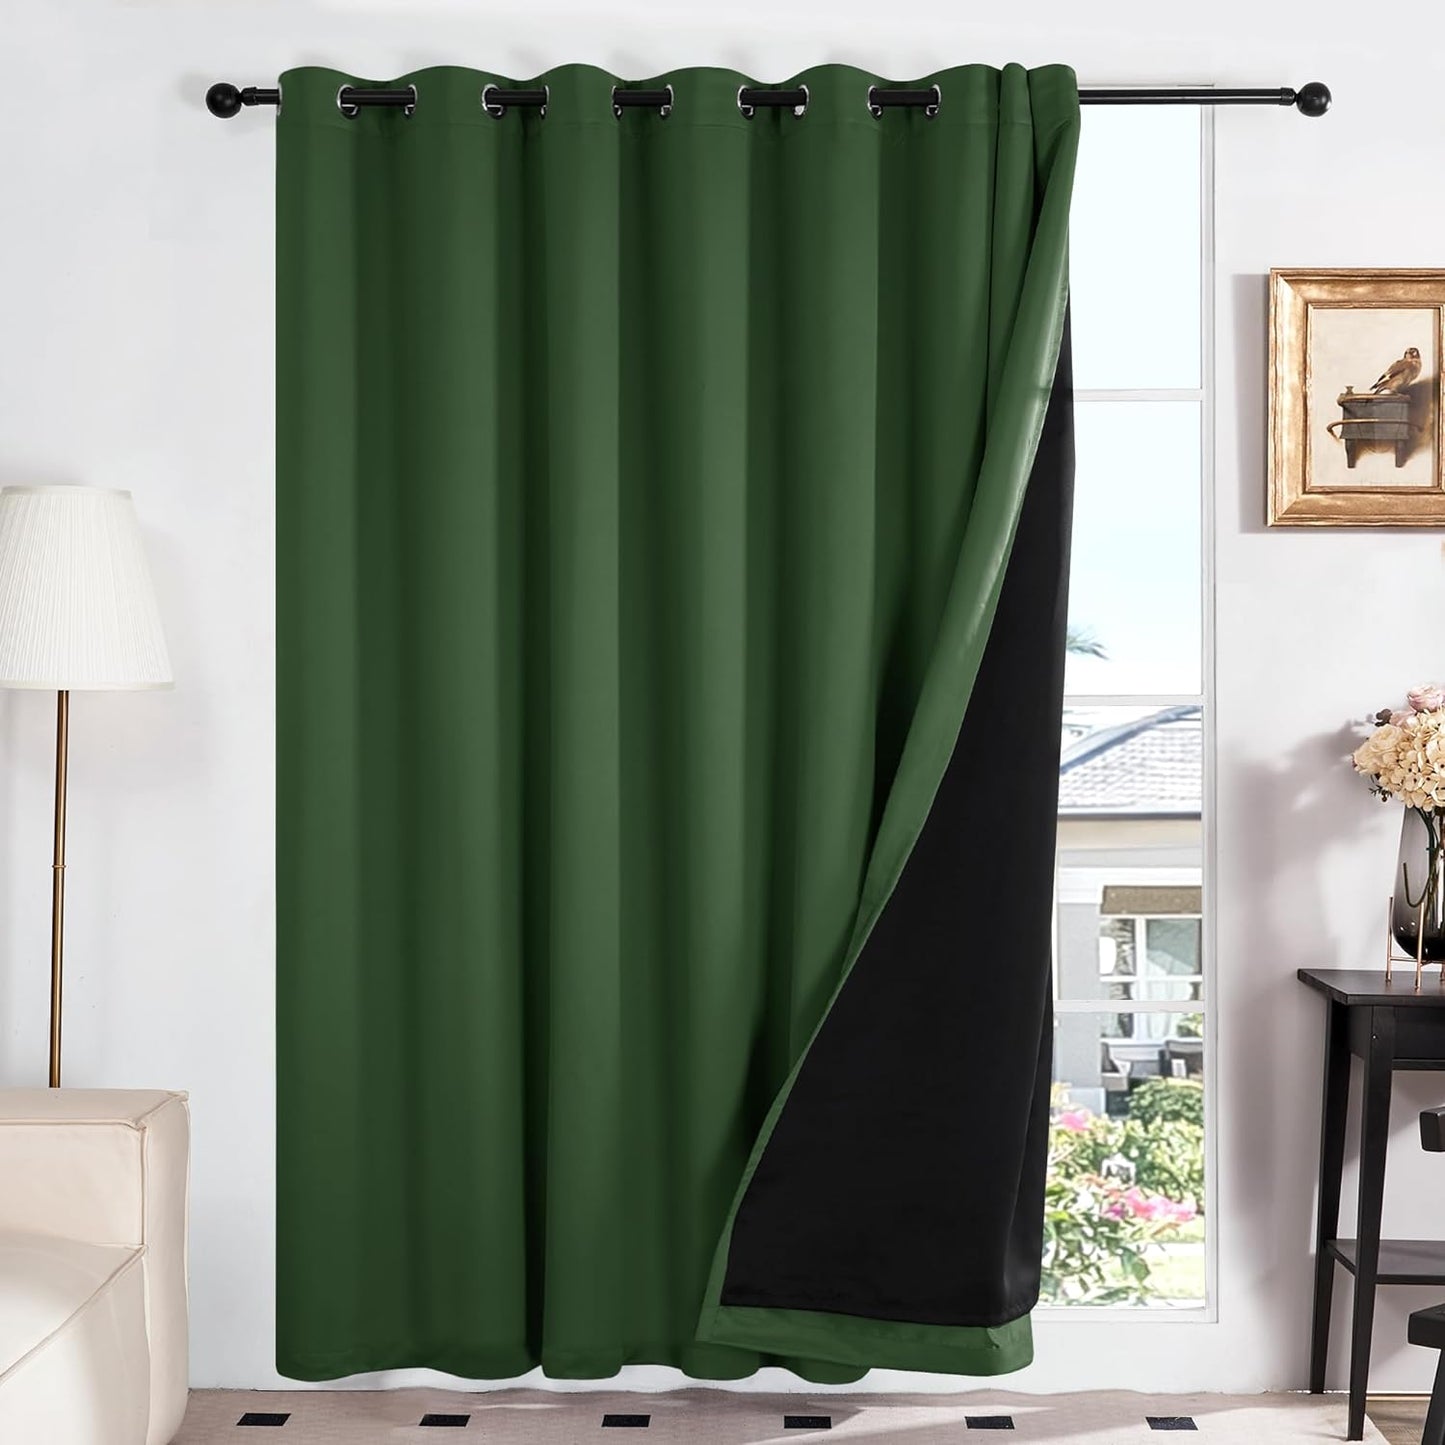 Deconovo 100% White Blackout Curtains, Double Layer Sliding Door Curtain for Living Room, Extra Wide Room Divder Curtains for Patio Door (100W X 84L Inches, Pure White, 1 Panel)  DECONOVO Green 100W X 95L Inch 